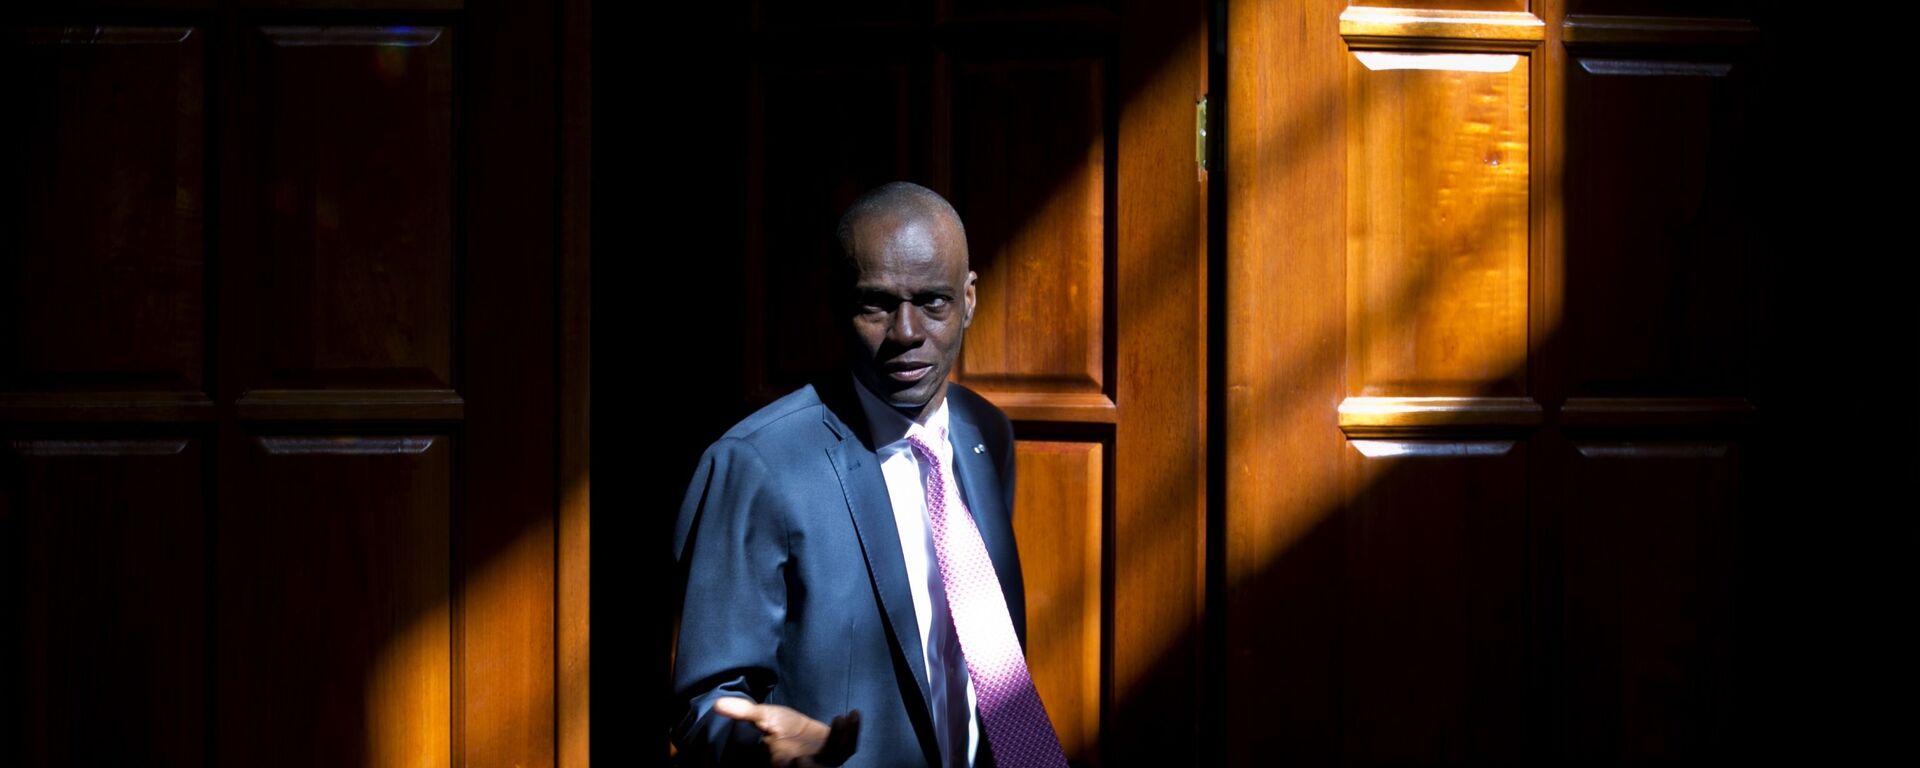 Haiti's President Jovenel Moise arrives for an interview at his home in Petion-Ville, a suburb of Port-au-Prince, Haiti, Friday, Feb. 7, 2020. Moise said Friday that he is optimistic that negotiations with a coalition of his political opponents will succeed in forging a power-sharing deal to end months of deadlock that have left the country without a functioning government. - Sputnik International, 1920, 07.07.2021